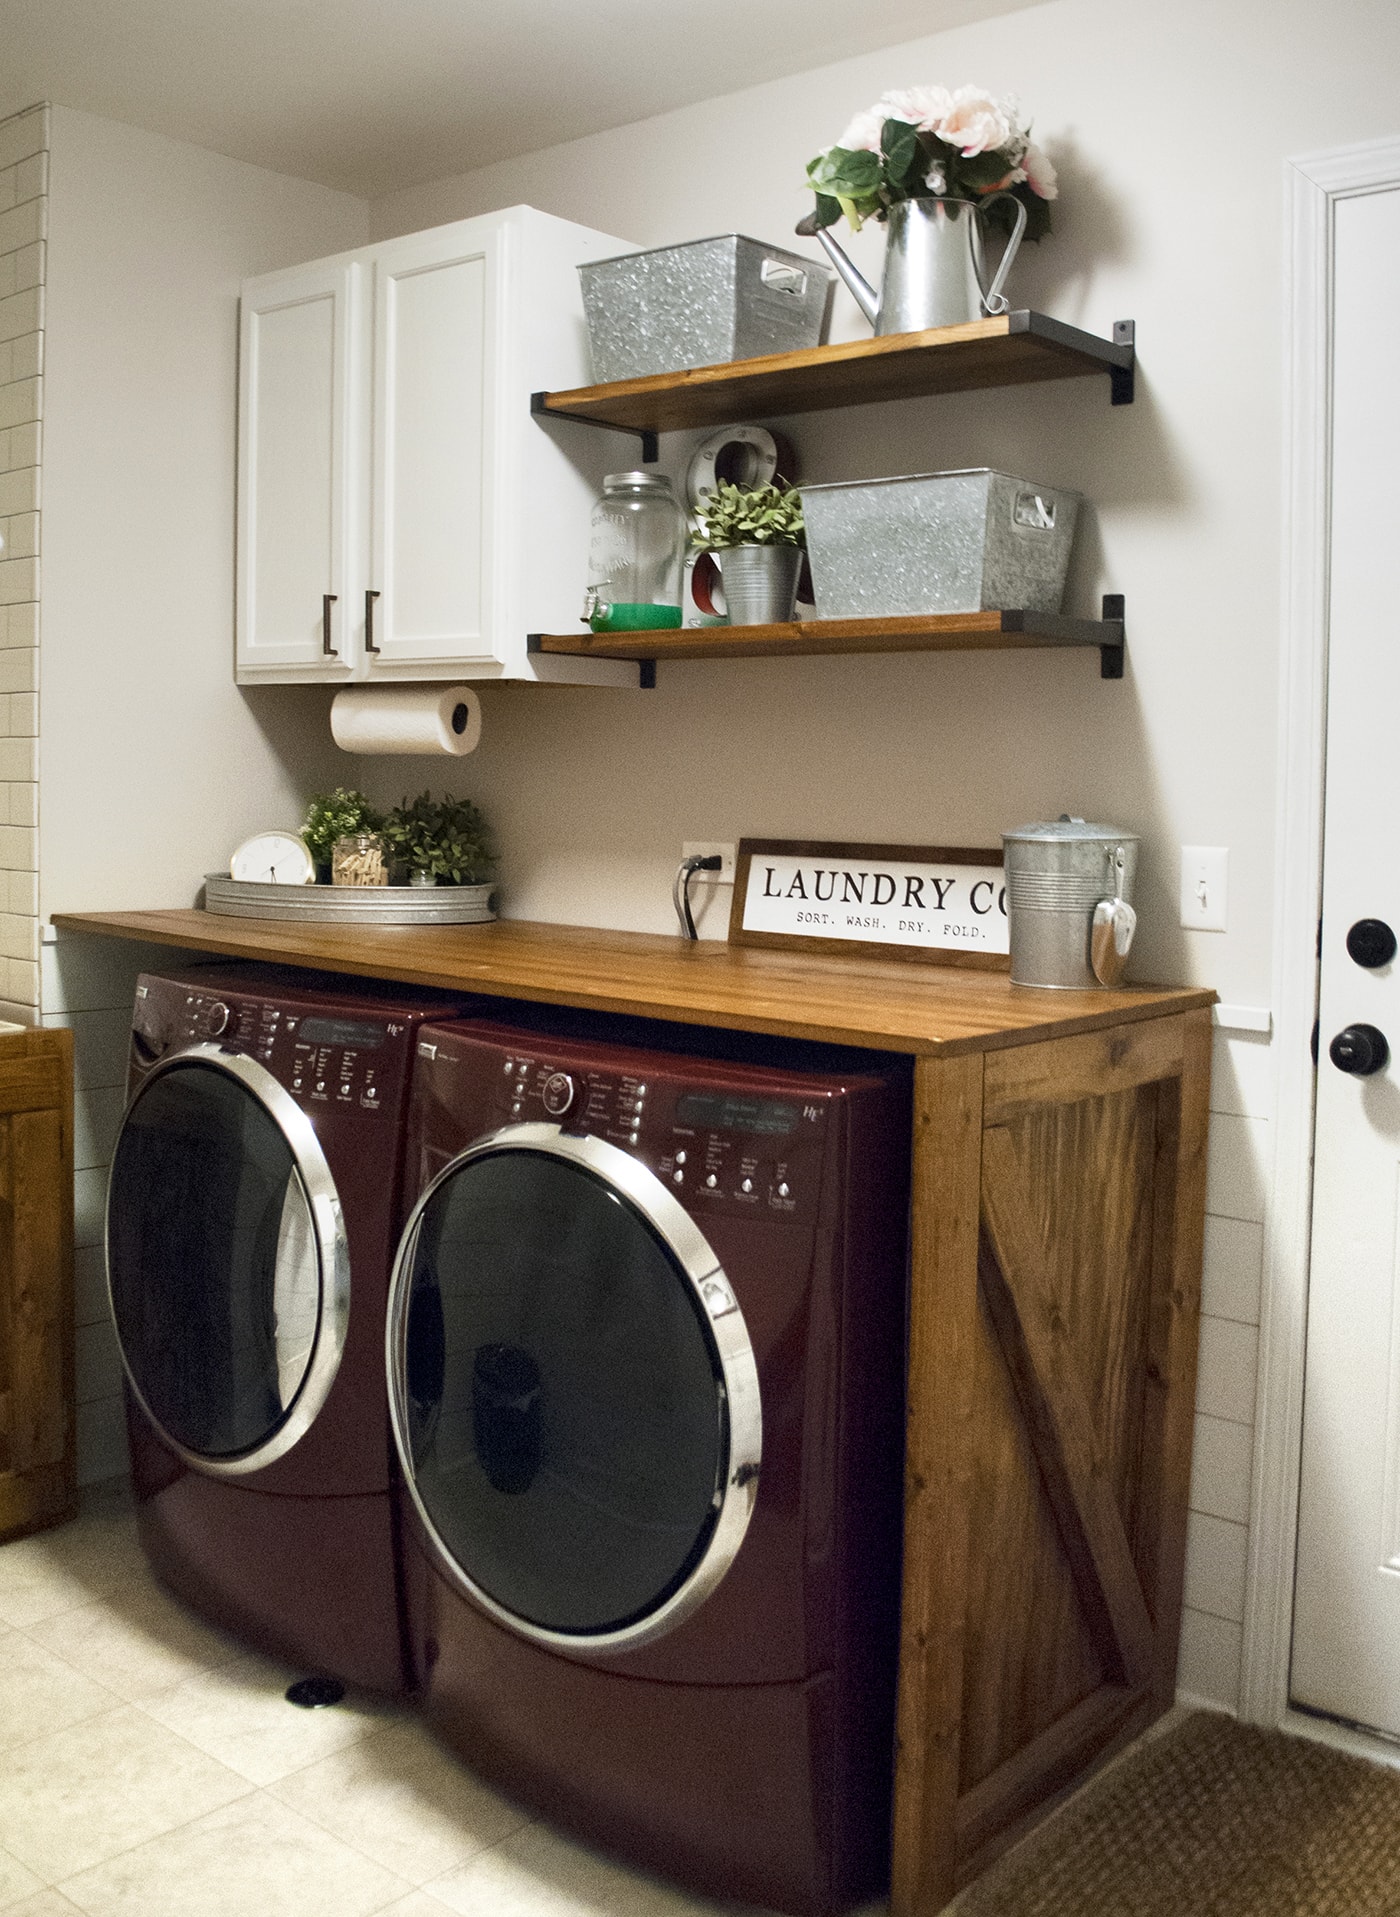 Easy Butcher Block Counter DIY - Our Laundry Room Reveal! 